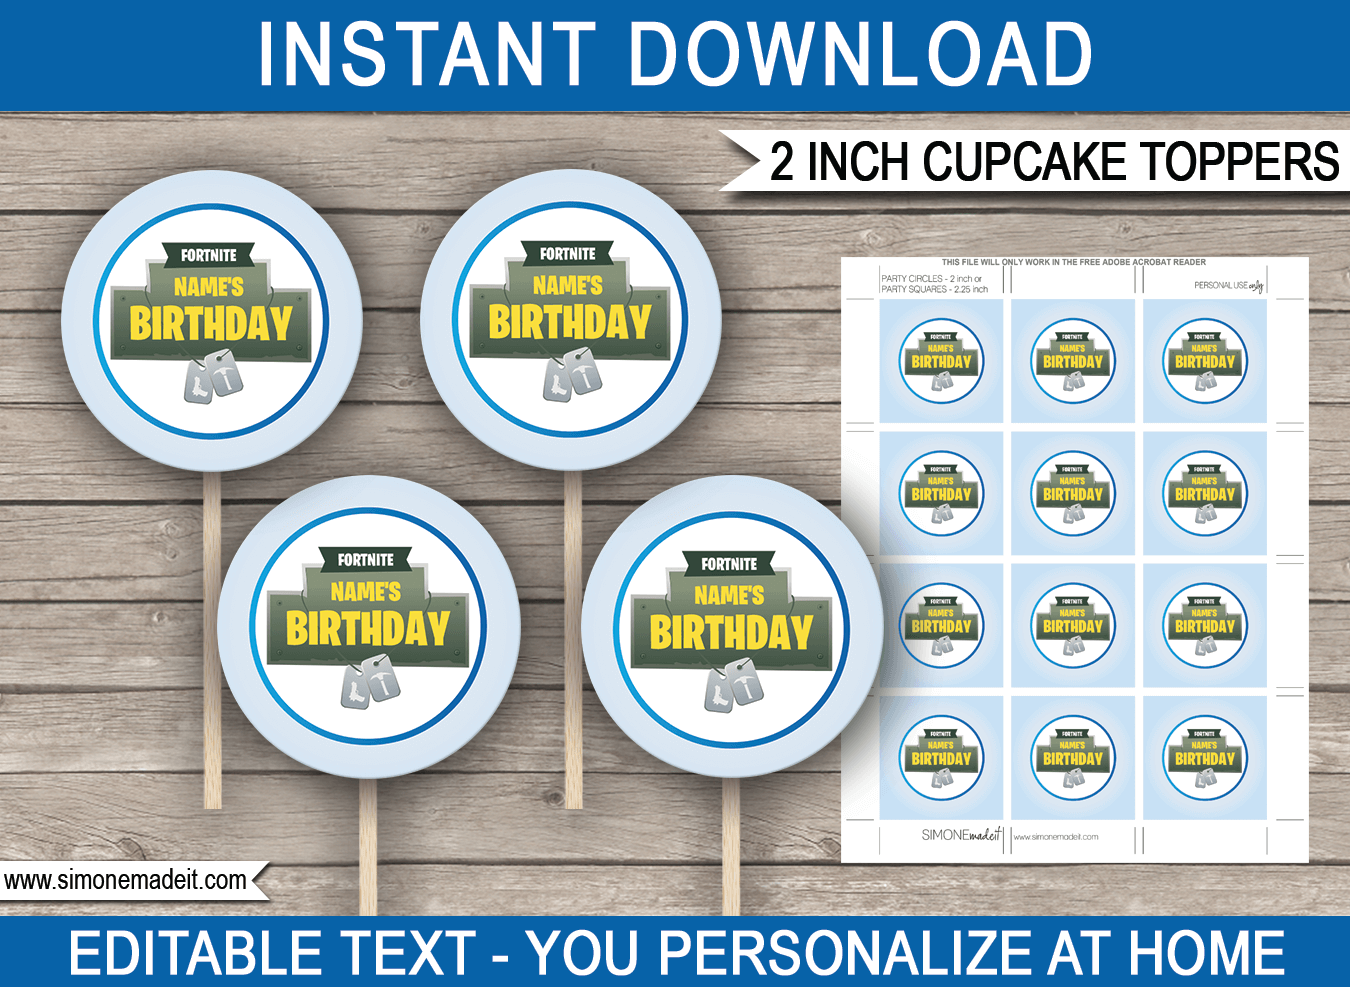 printable fortnite cupcake toppers fortnite birthday party decorations battle royale 2 inch - fortnite birthday banner free printable